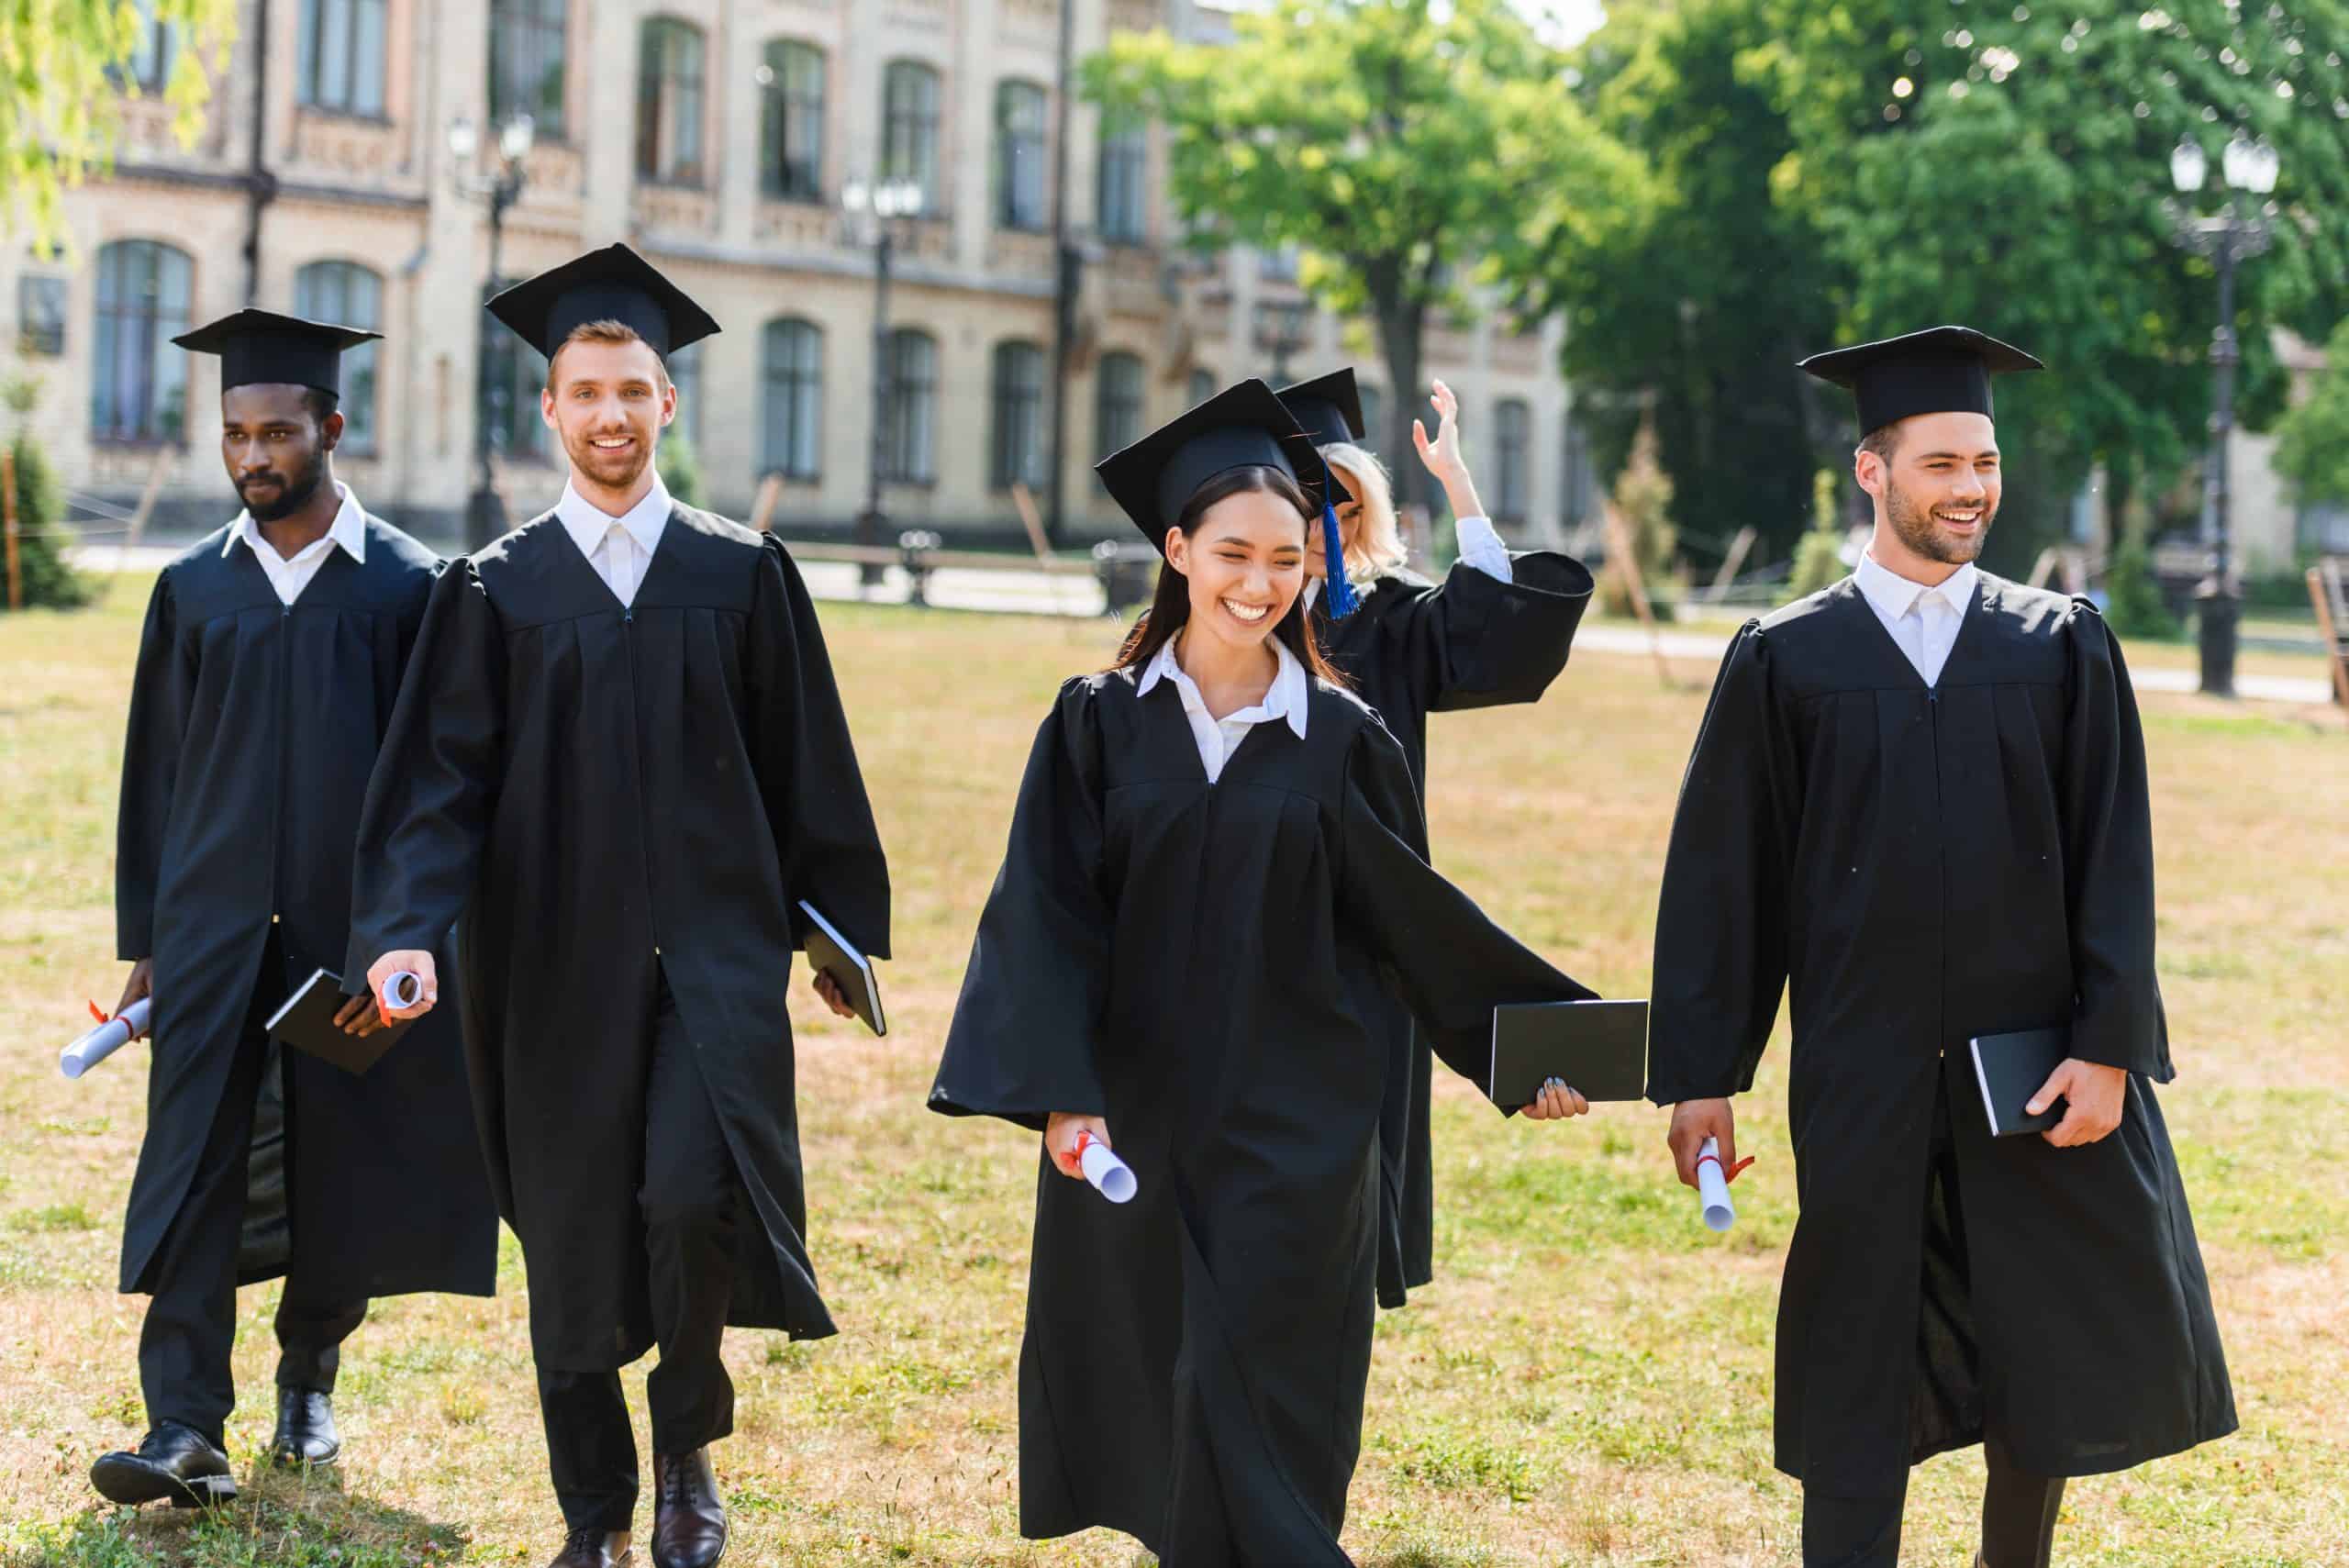 The Best Ways to Find Work After Graduating College